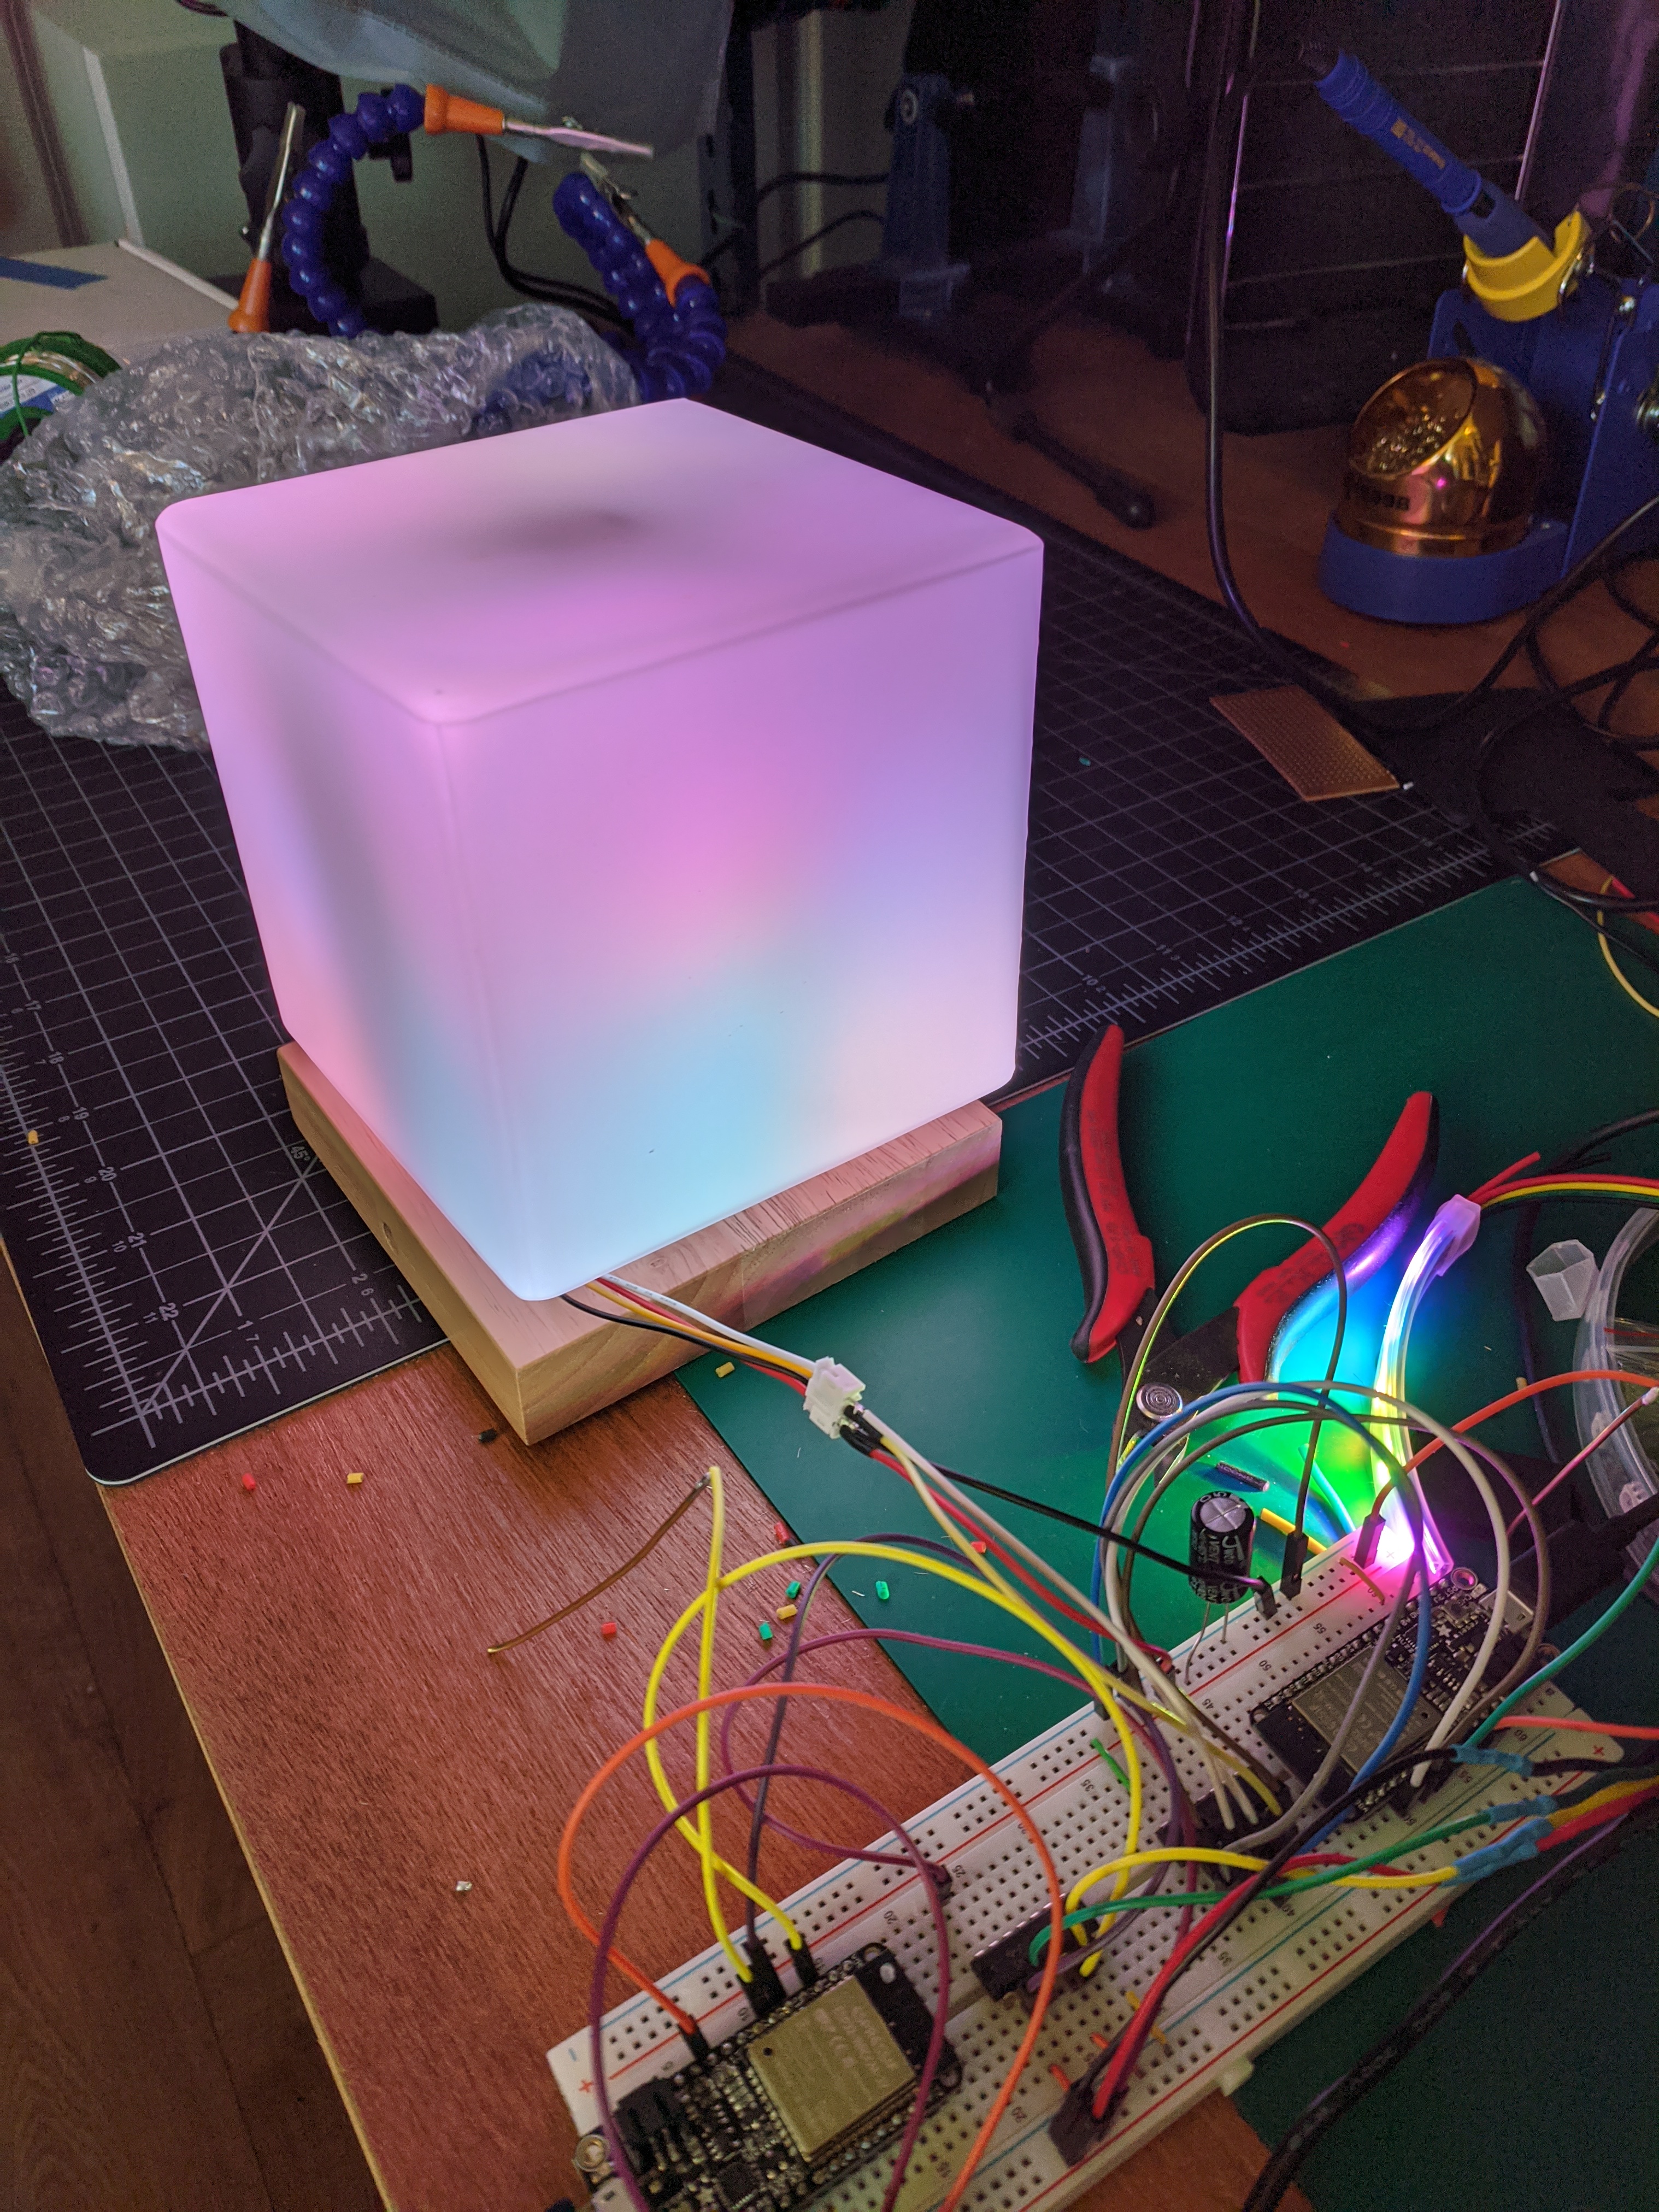 ESP32 microcontroller on a breadboard with wires leading into a cube lamp glowing in several colors